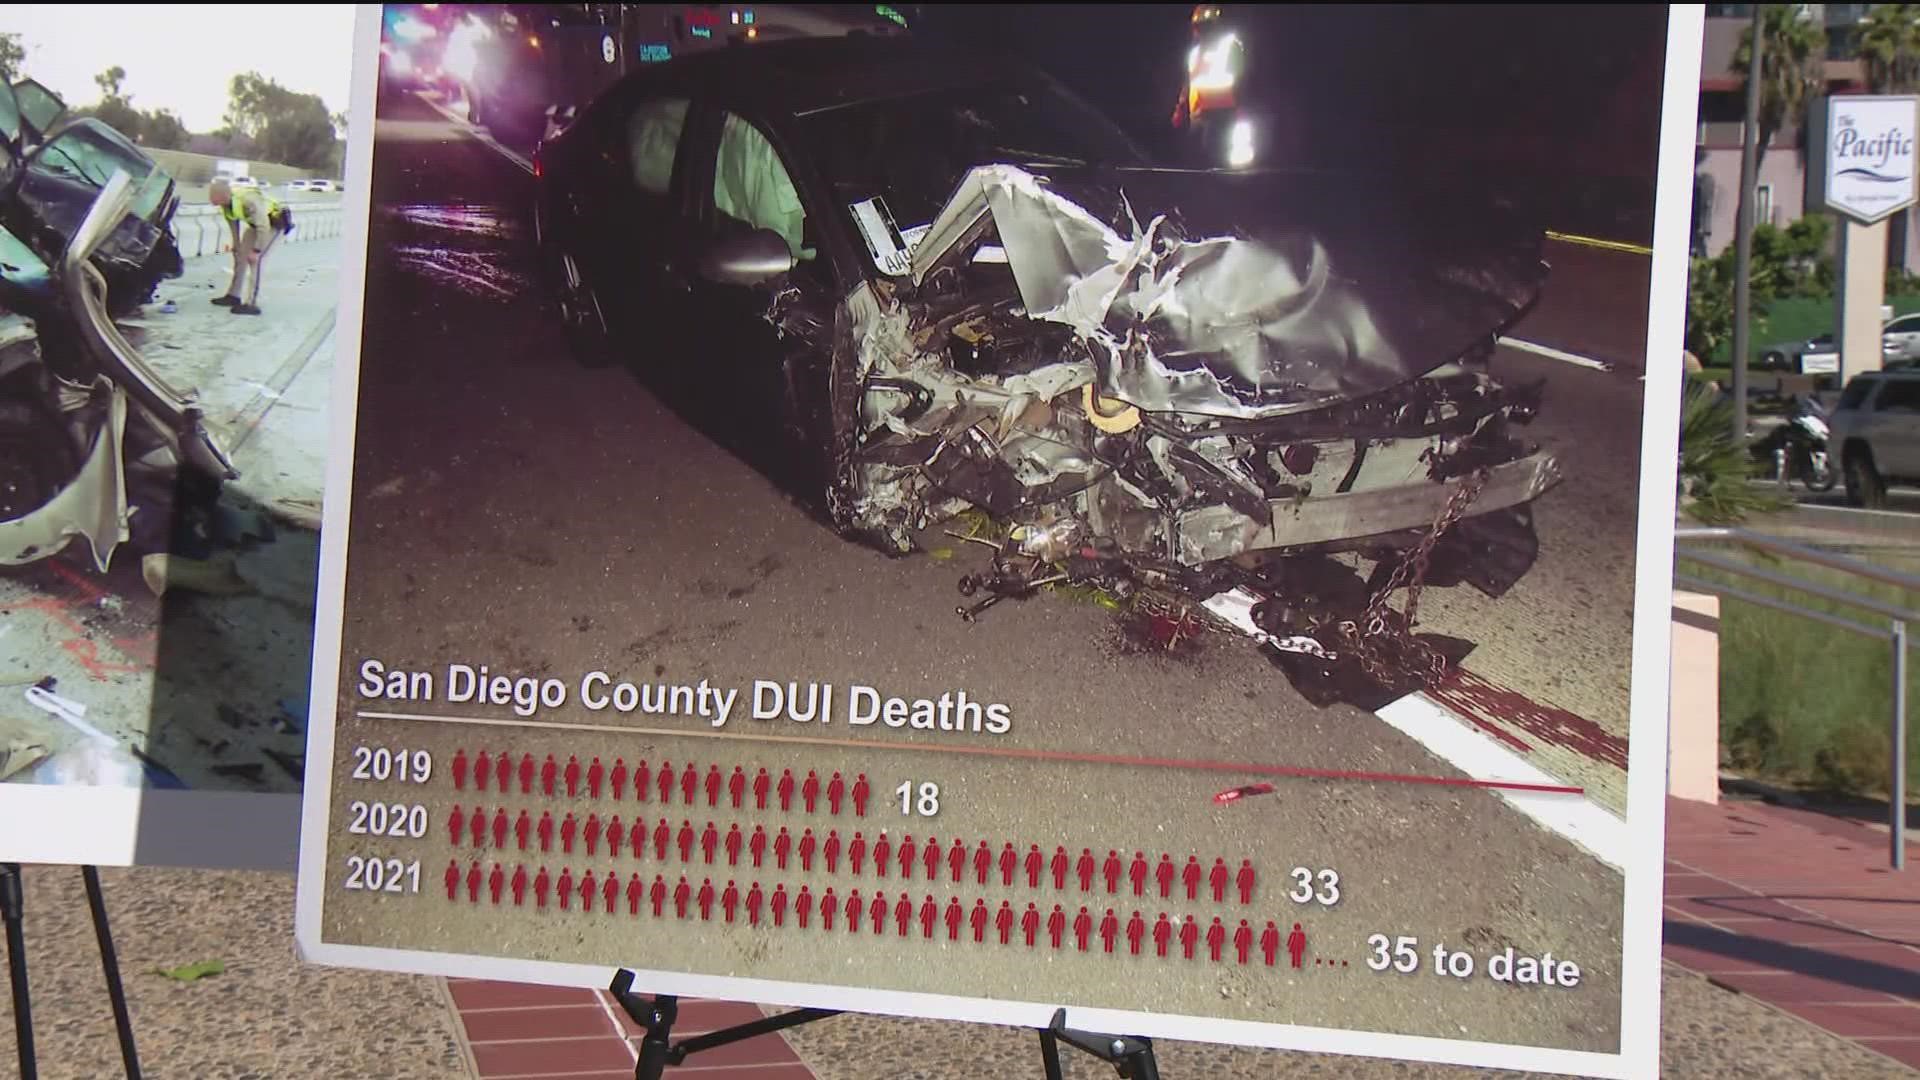 Local prosecutors and law enforcement officials said 35 people have died in DUI crashes this year, already eclipsing last year's total.